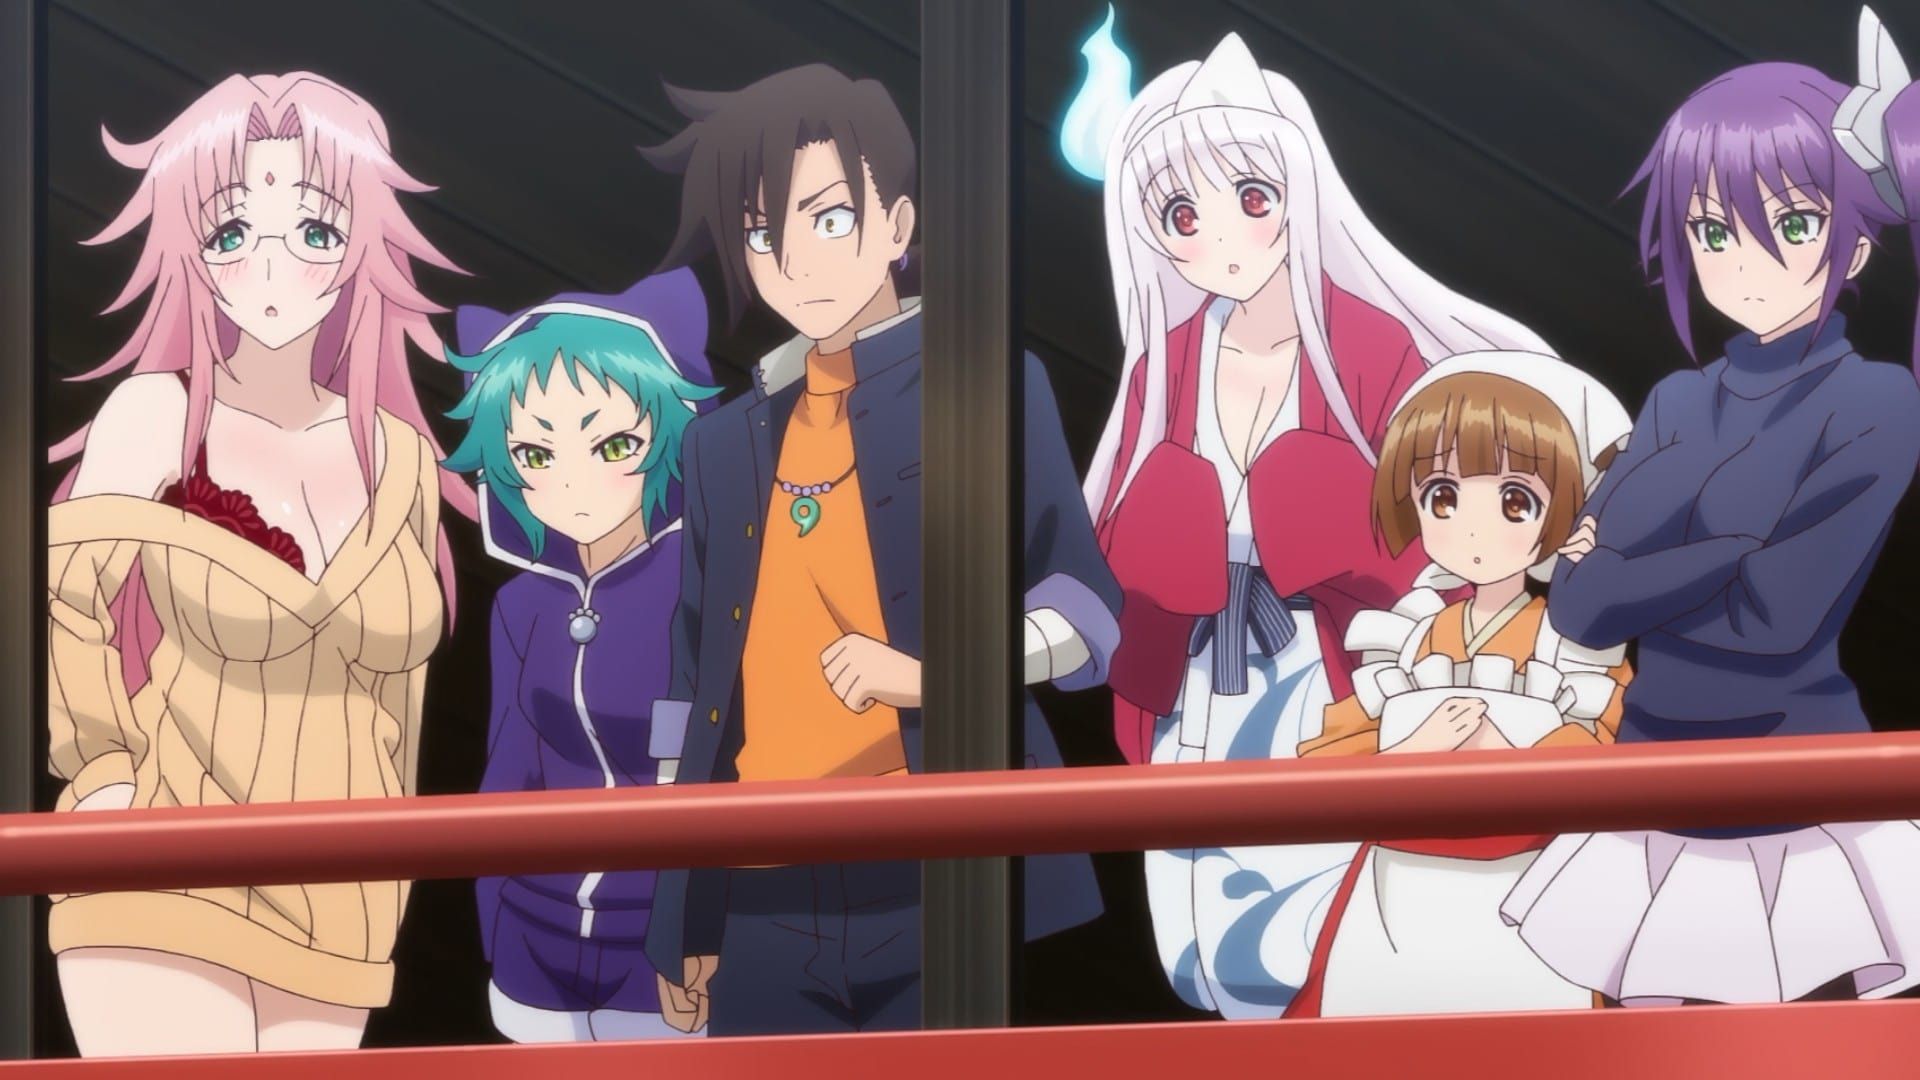 Watch Yuuna and the Haunted Hot Springs season 1 episode 4 streaming online